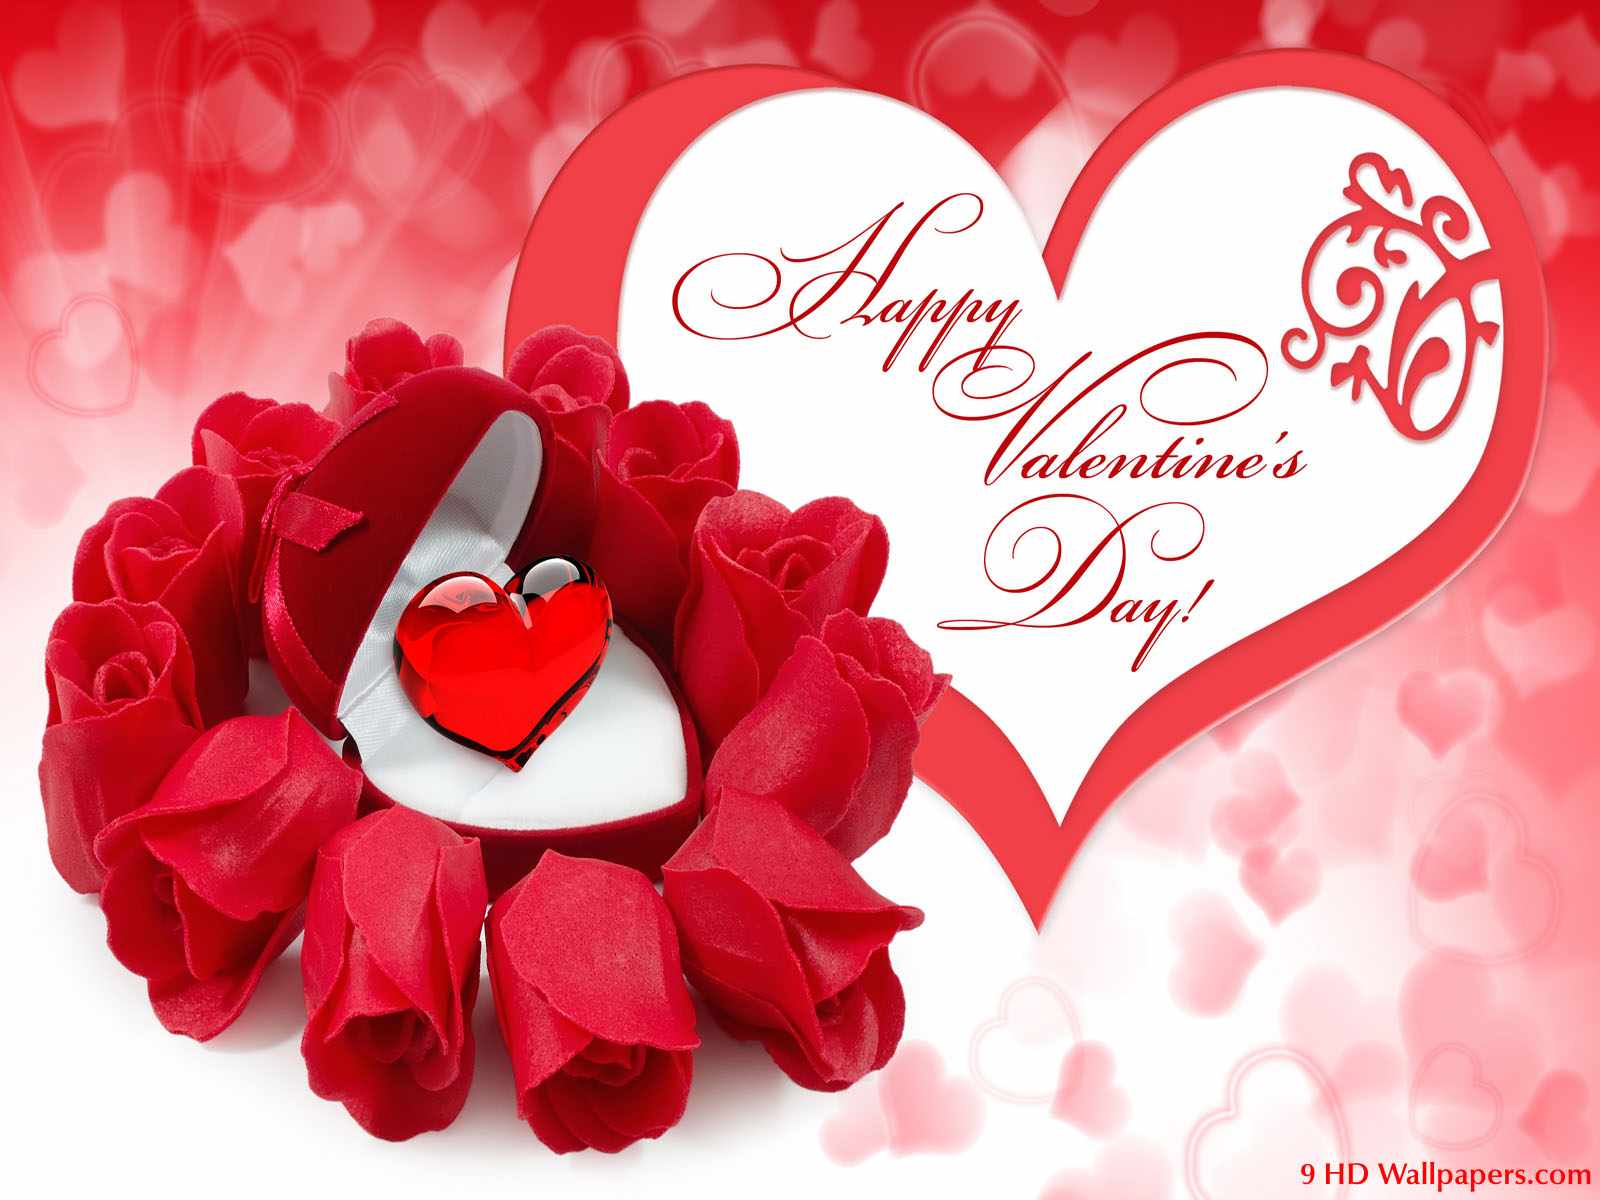 Happy Valentines Day Greeting Card For You Wallpaper With